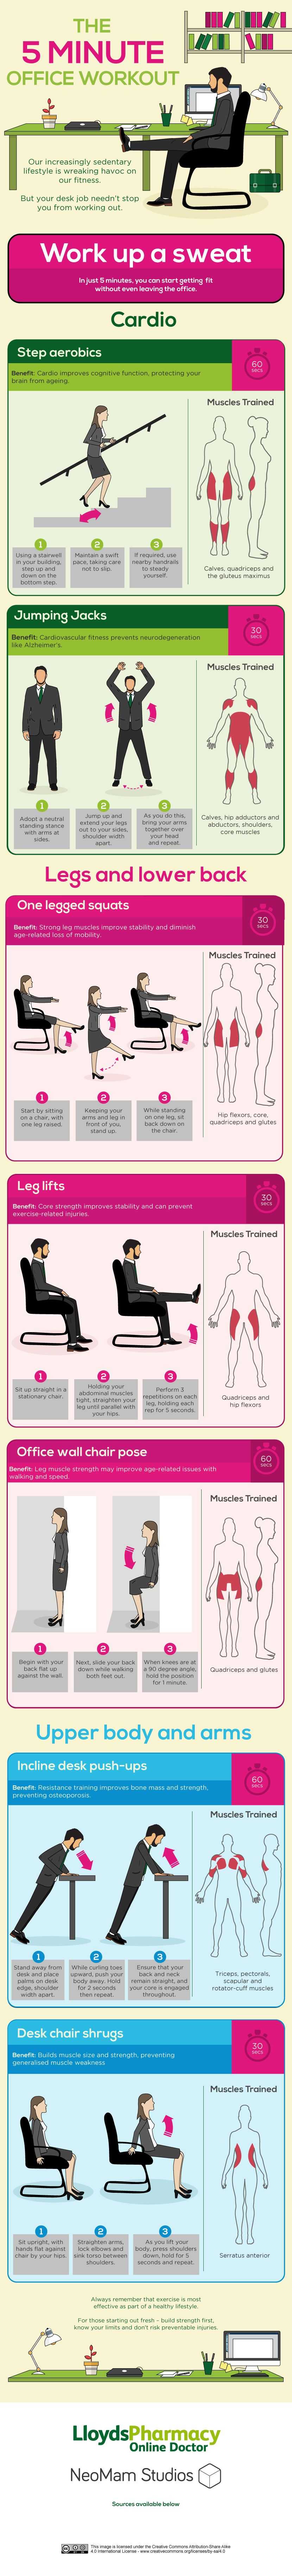 The 5 Minute Office Workout